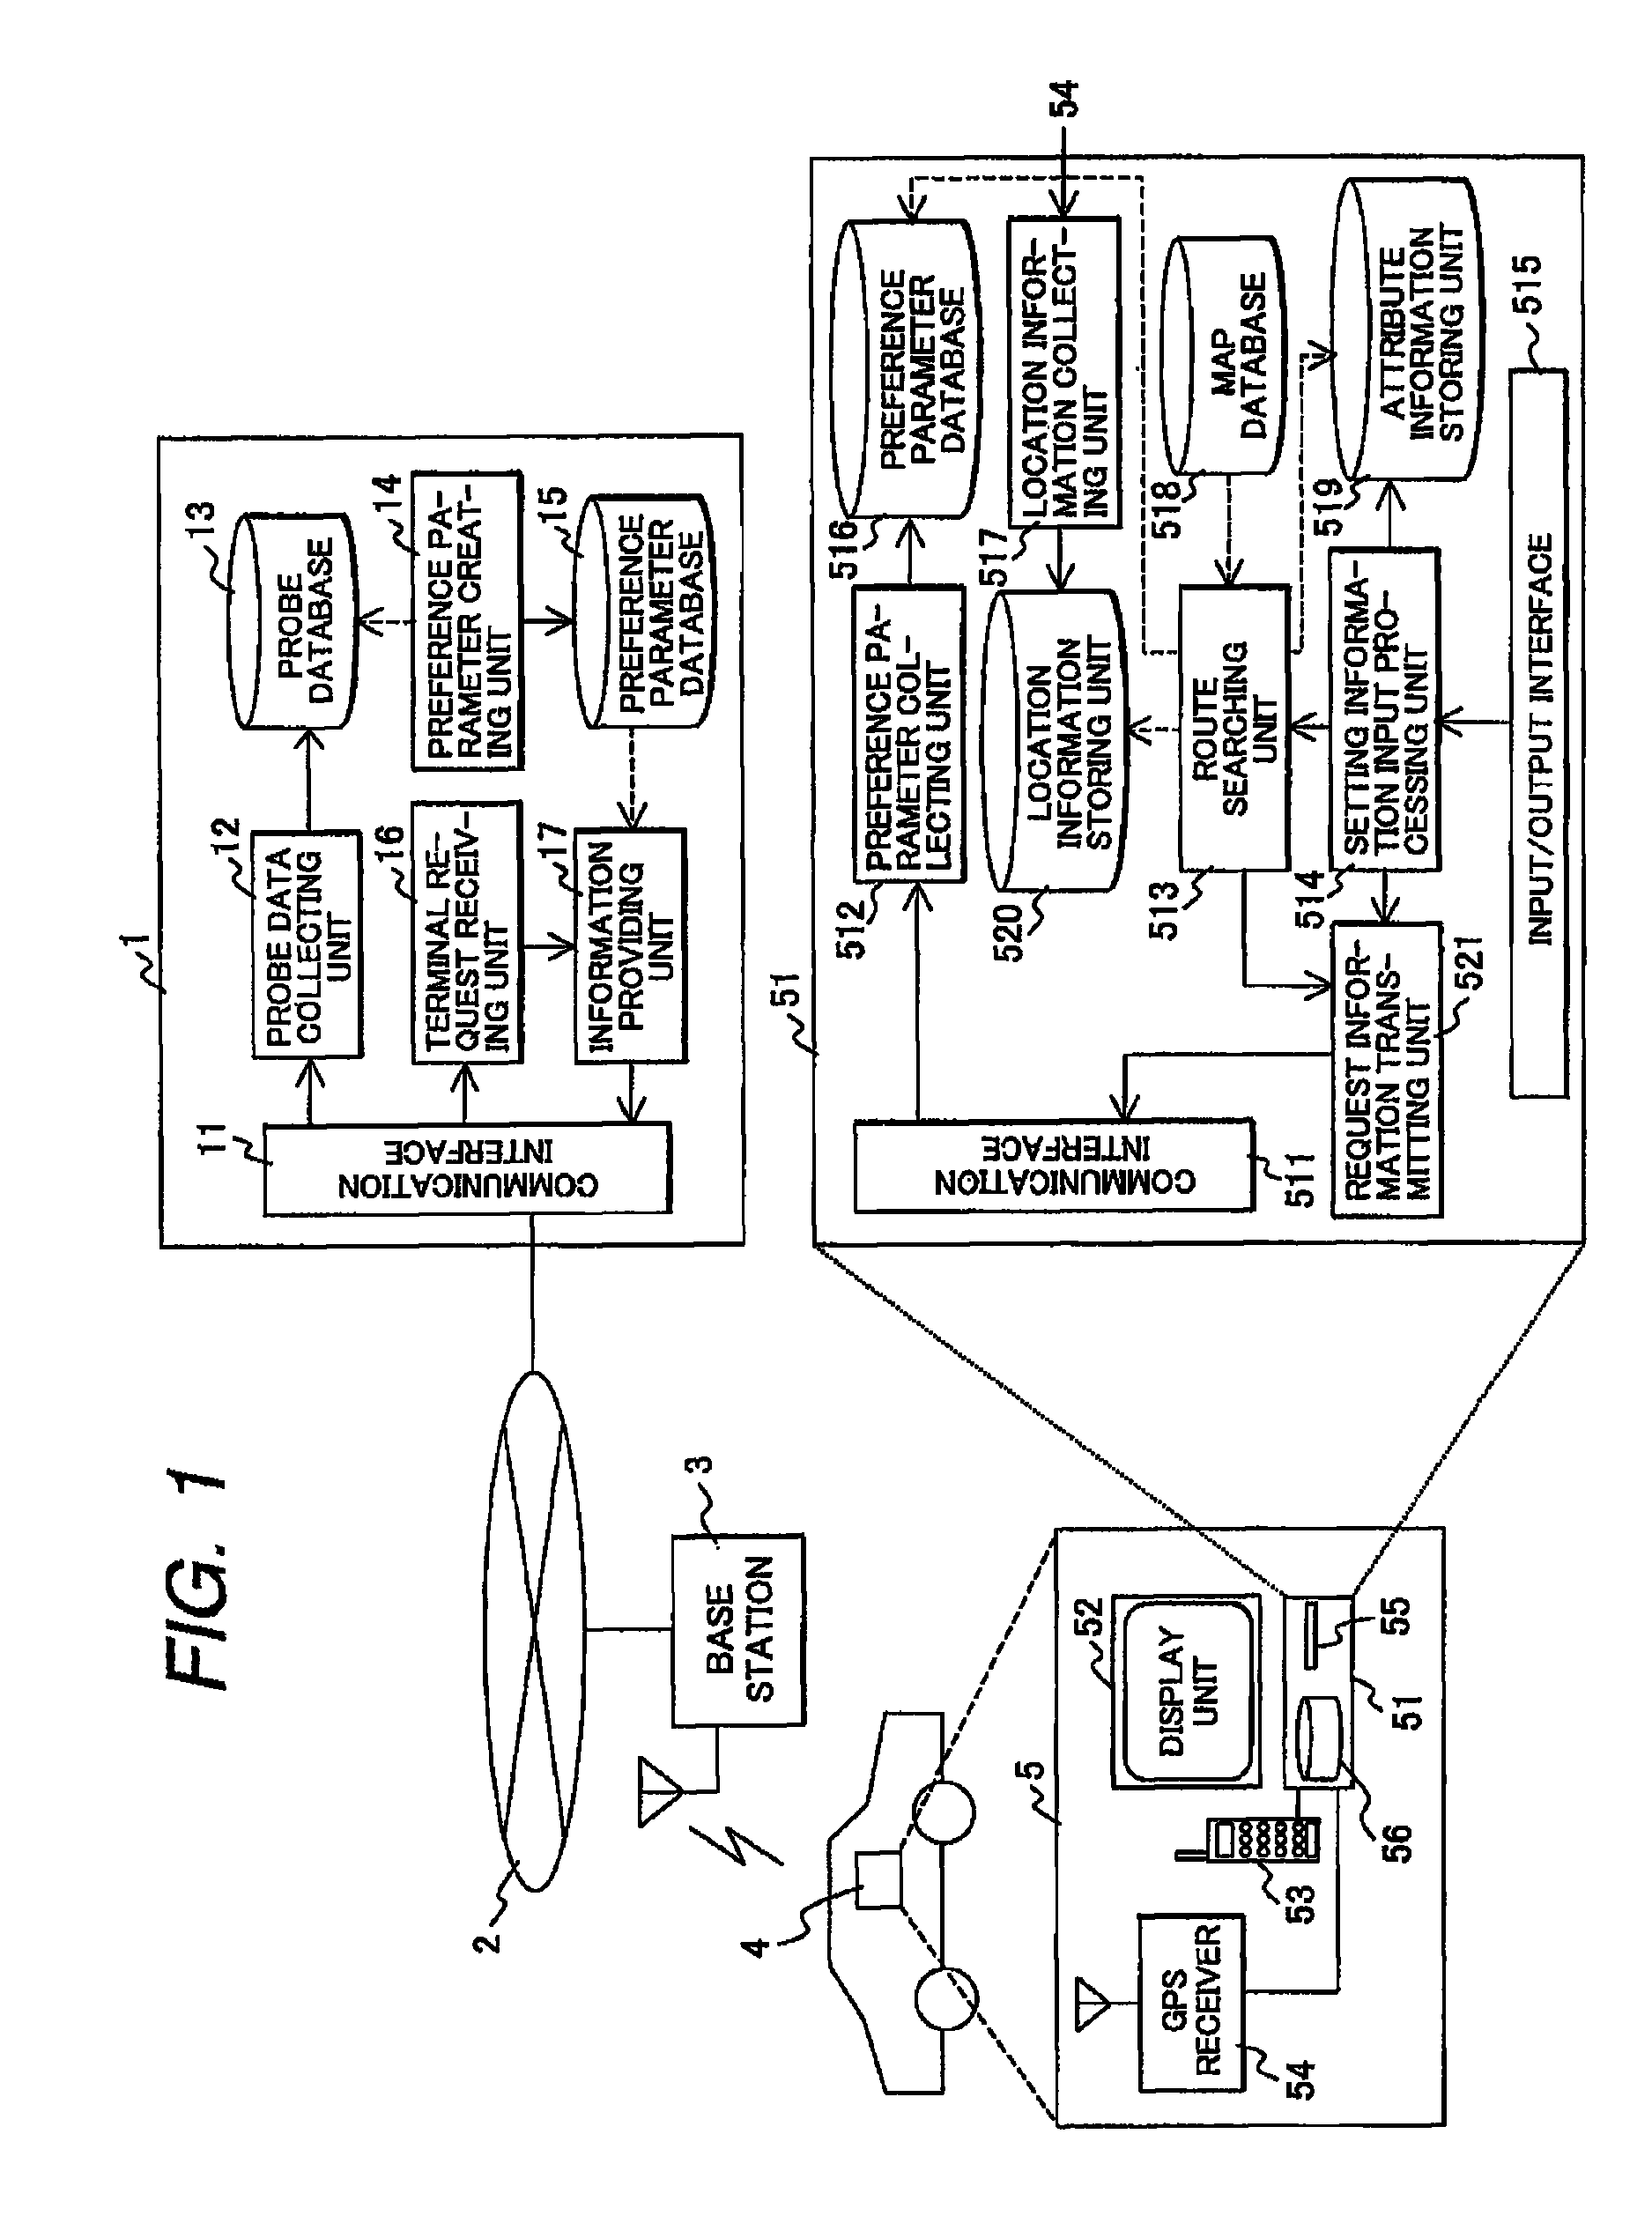 Method and system for route searching, and navigation apparatus using the same